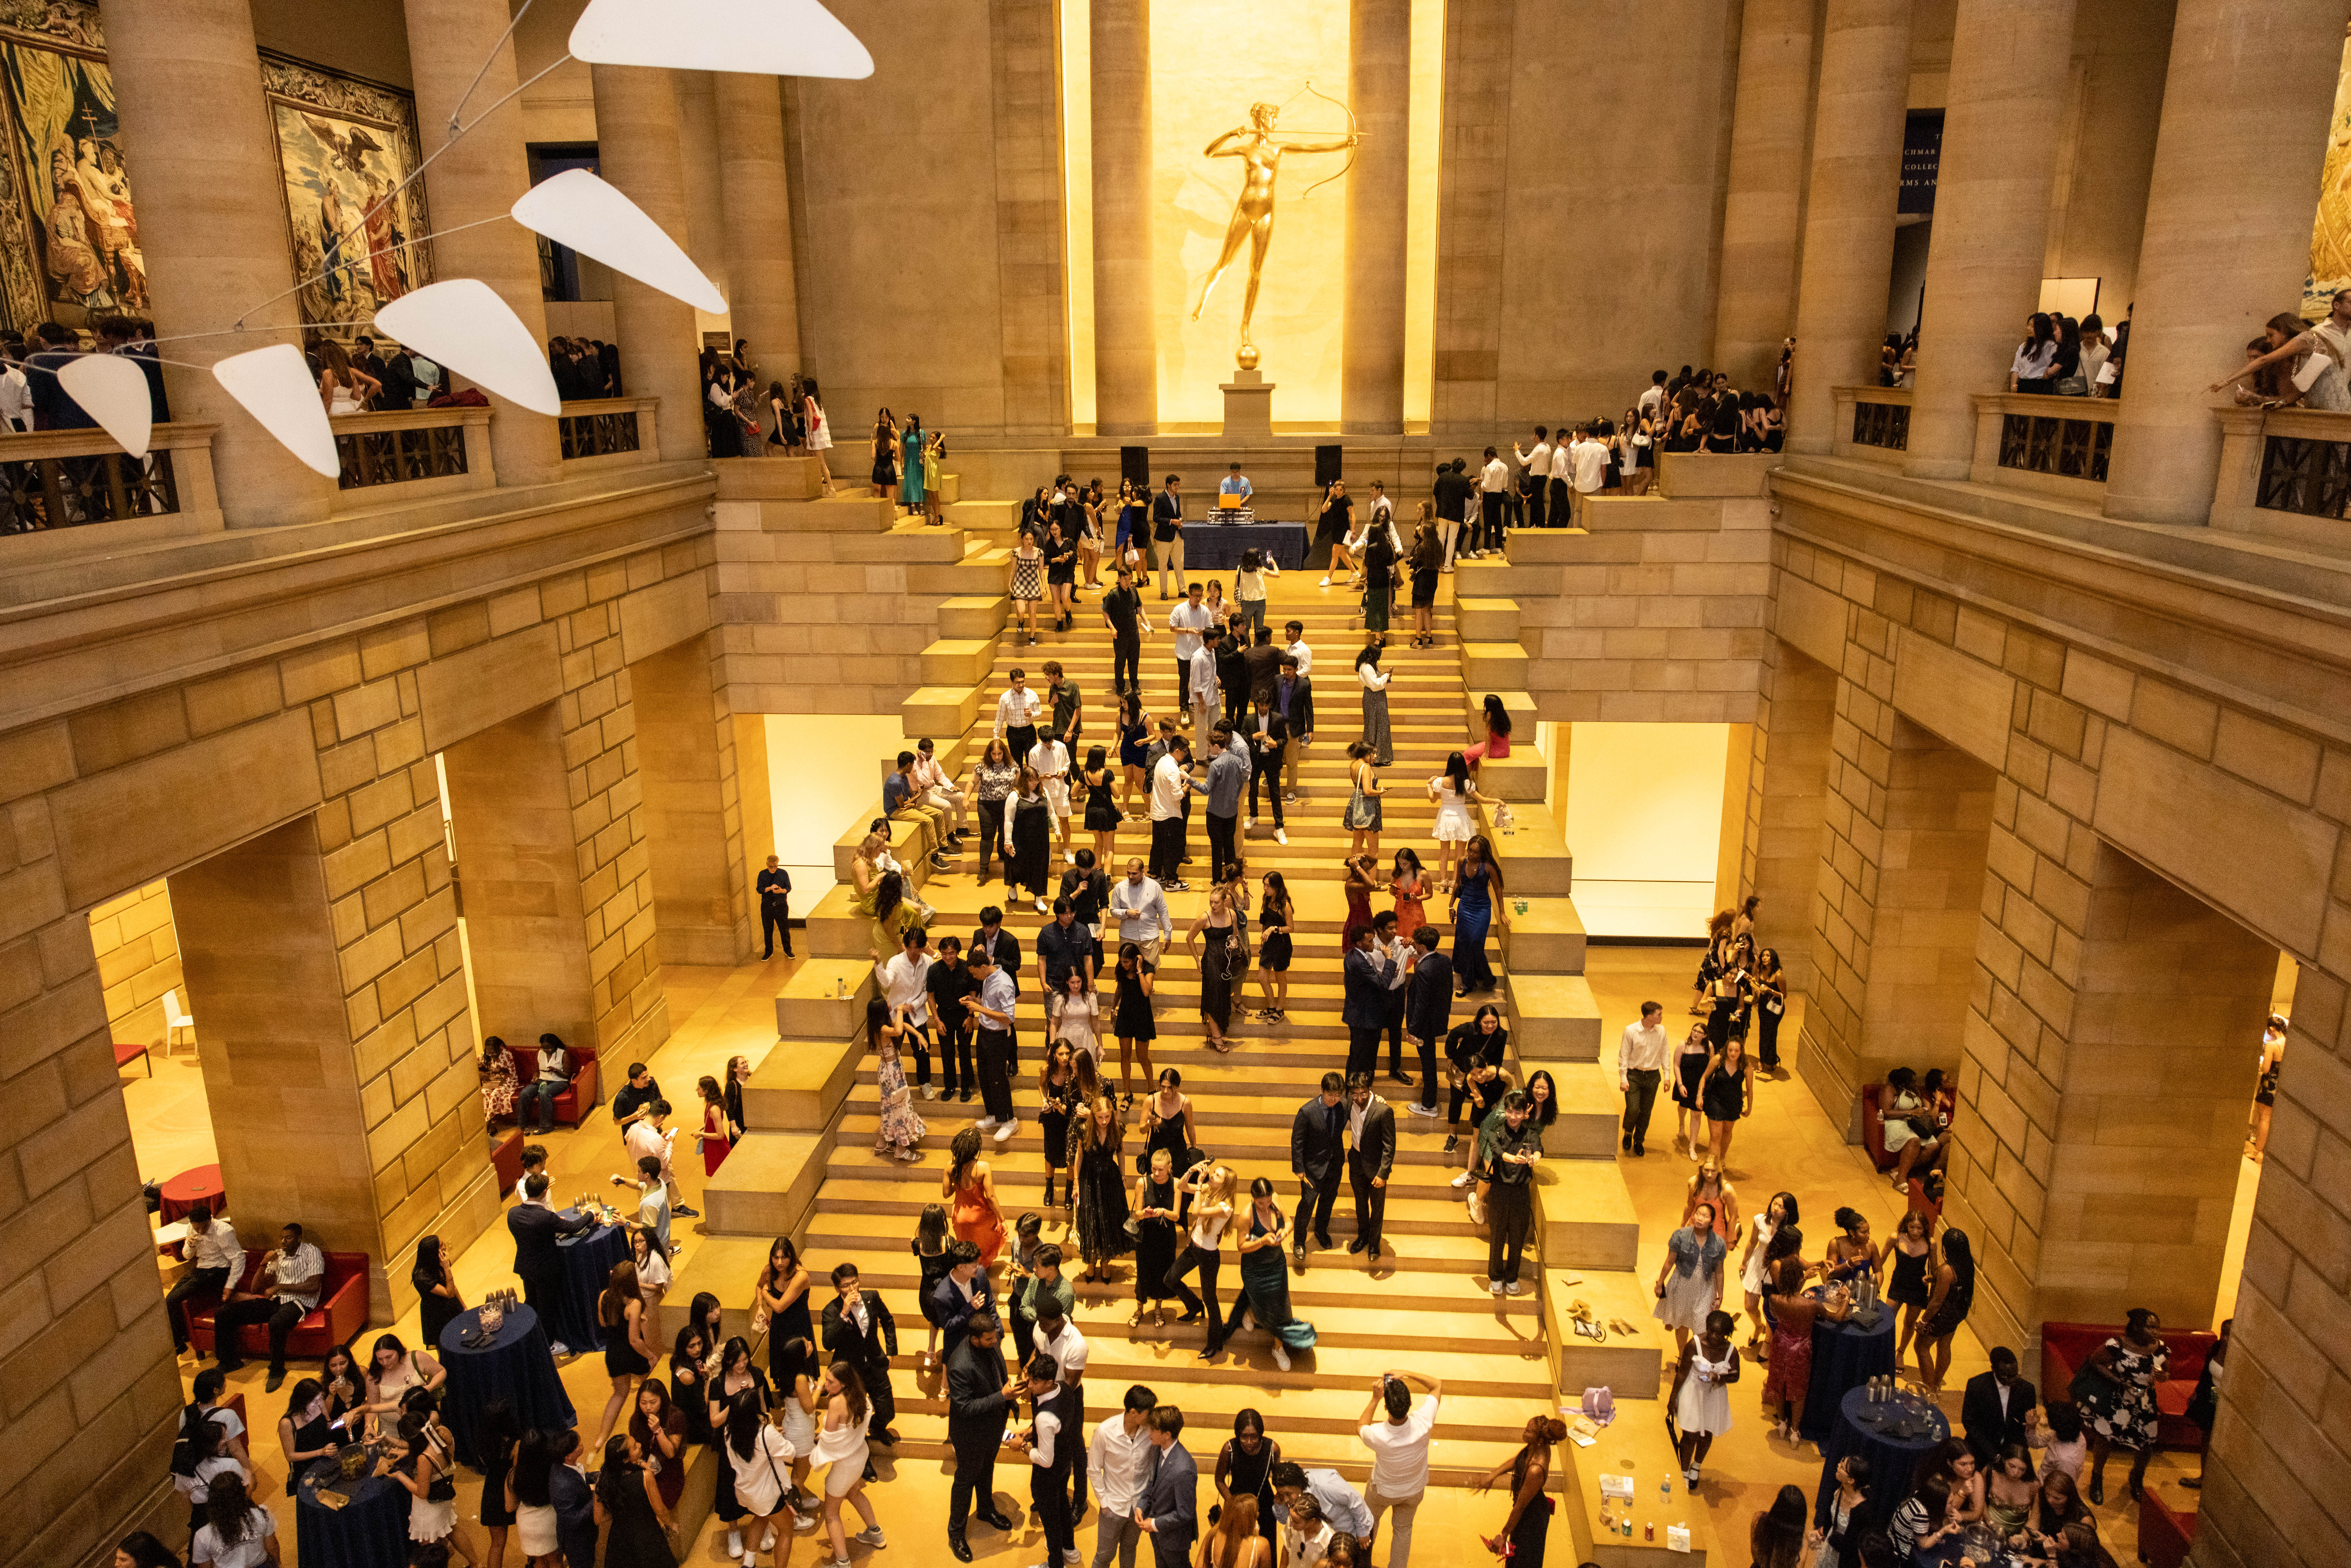 A bird view of the interior of the Philadelphia Museum of Art